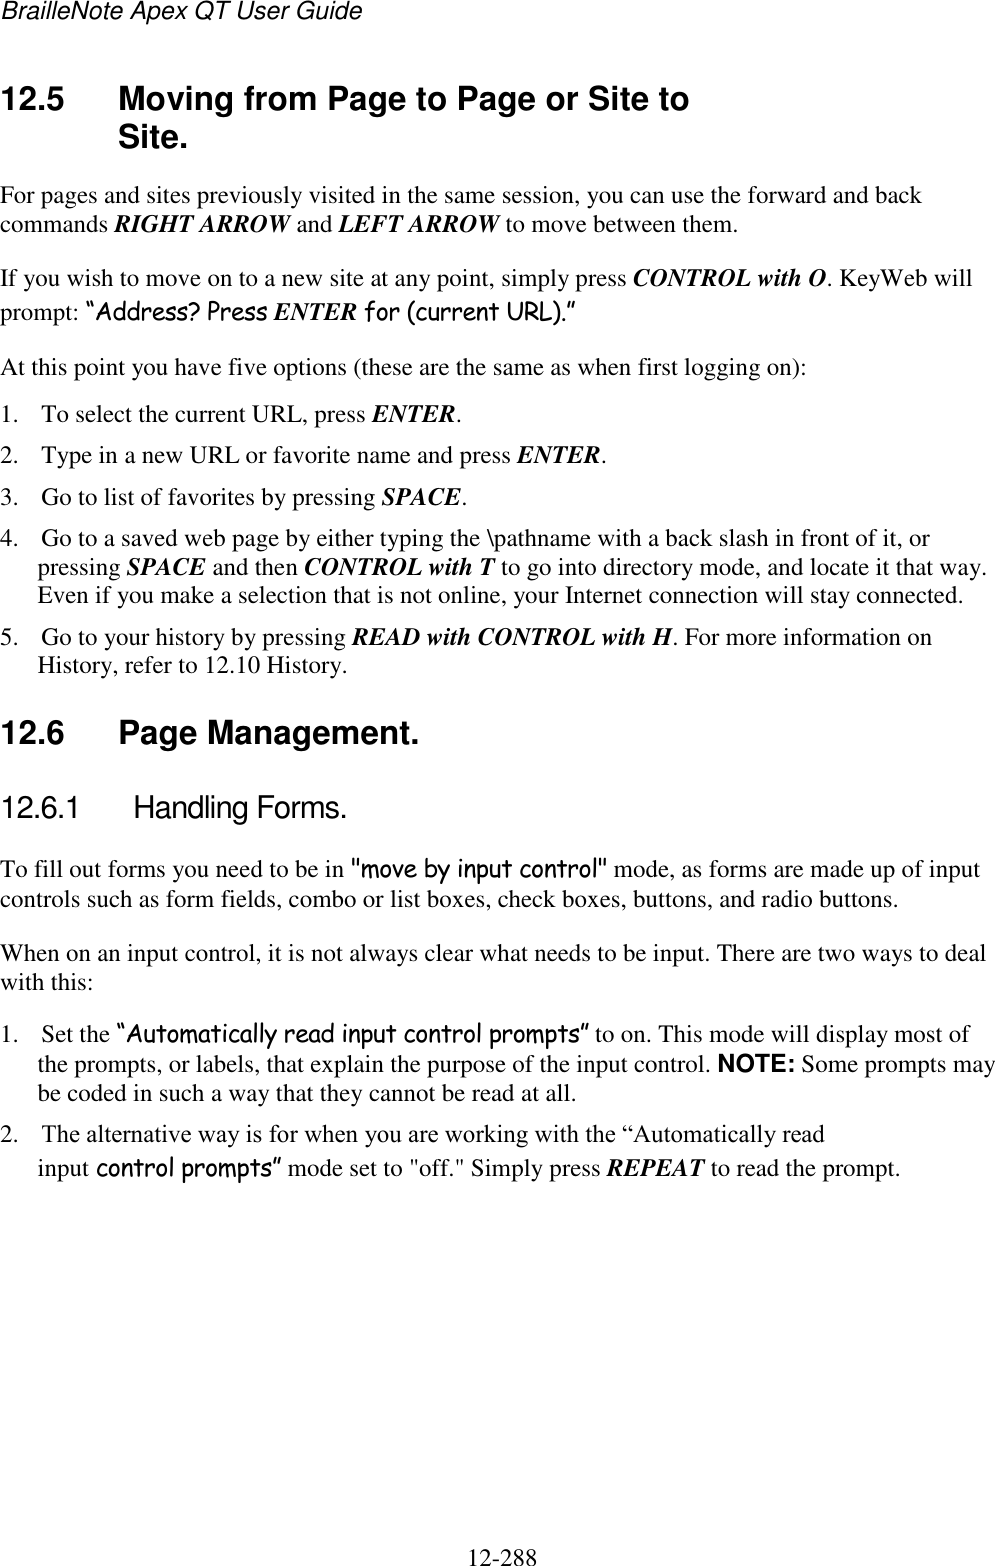 BrailleNote Apex QT User Guide  12-288   12.5  Moving from Page to Page or Site to Site. For pages and sites previously visited in the same session, you can use the forward and back commands RIGHT ARROW and LEFT ARROW to move between them. If you wish to move on to a new site at any point, simply press CONTROL with O. KeyWeb will prompt: “Address? Press ENTER for (current URL).” At this point you have five options (these are the same as when first logging on): 1. To select the current URL, press ENTER. 2. Type in a new URL or favorite name and press ENTER. 3. Go to list of favorites by pressing SPACE. 4. Go to a saved web page by either typing the \pathname with a back slash in front of it, or pressing SPACE and then CONTROL with T to go into directory mode, and locate it that way. Even if you make a selection that is not online, your Internet connection will stay connected. 5. Go to your history by pressing READ with CONTROL with H. For more information on History, refer to 12.10 History.  12.6  Page Management. 12.6.1  Handling Forms. To fill out forms you need to be in &quot;move by input control&quot; mode, as forms are made up of input controls such as form fields, combo or list boxes, check boxes, buttons, and radio buttons. When on an input control, it is not always clear what needs to be input. There are two ways to deal with this: 1. Set the “Automatically read input control prompts” to on. This mode will display most of the prompts, or labels, that explain the purpose of the input control. NOTE: Some prompts may be coded in such a way that they cannot be read at all. 2. The alternative way is for when you are working with the “Automatically read input control prompts” mode set to &quot;off.&quot; Simply press REPEAT to read the prompt.  